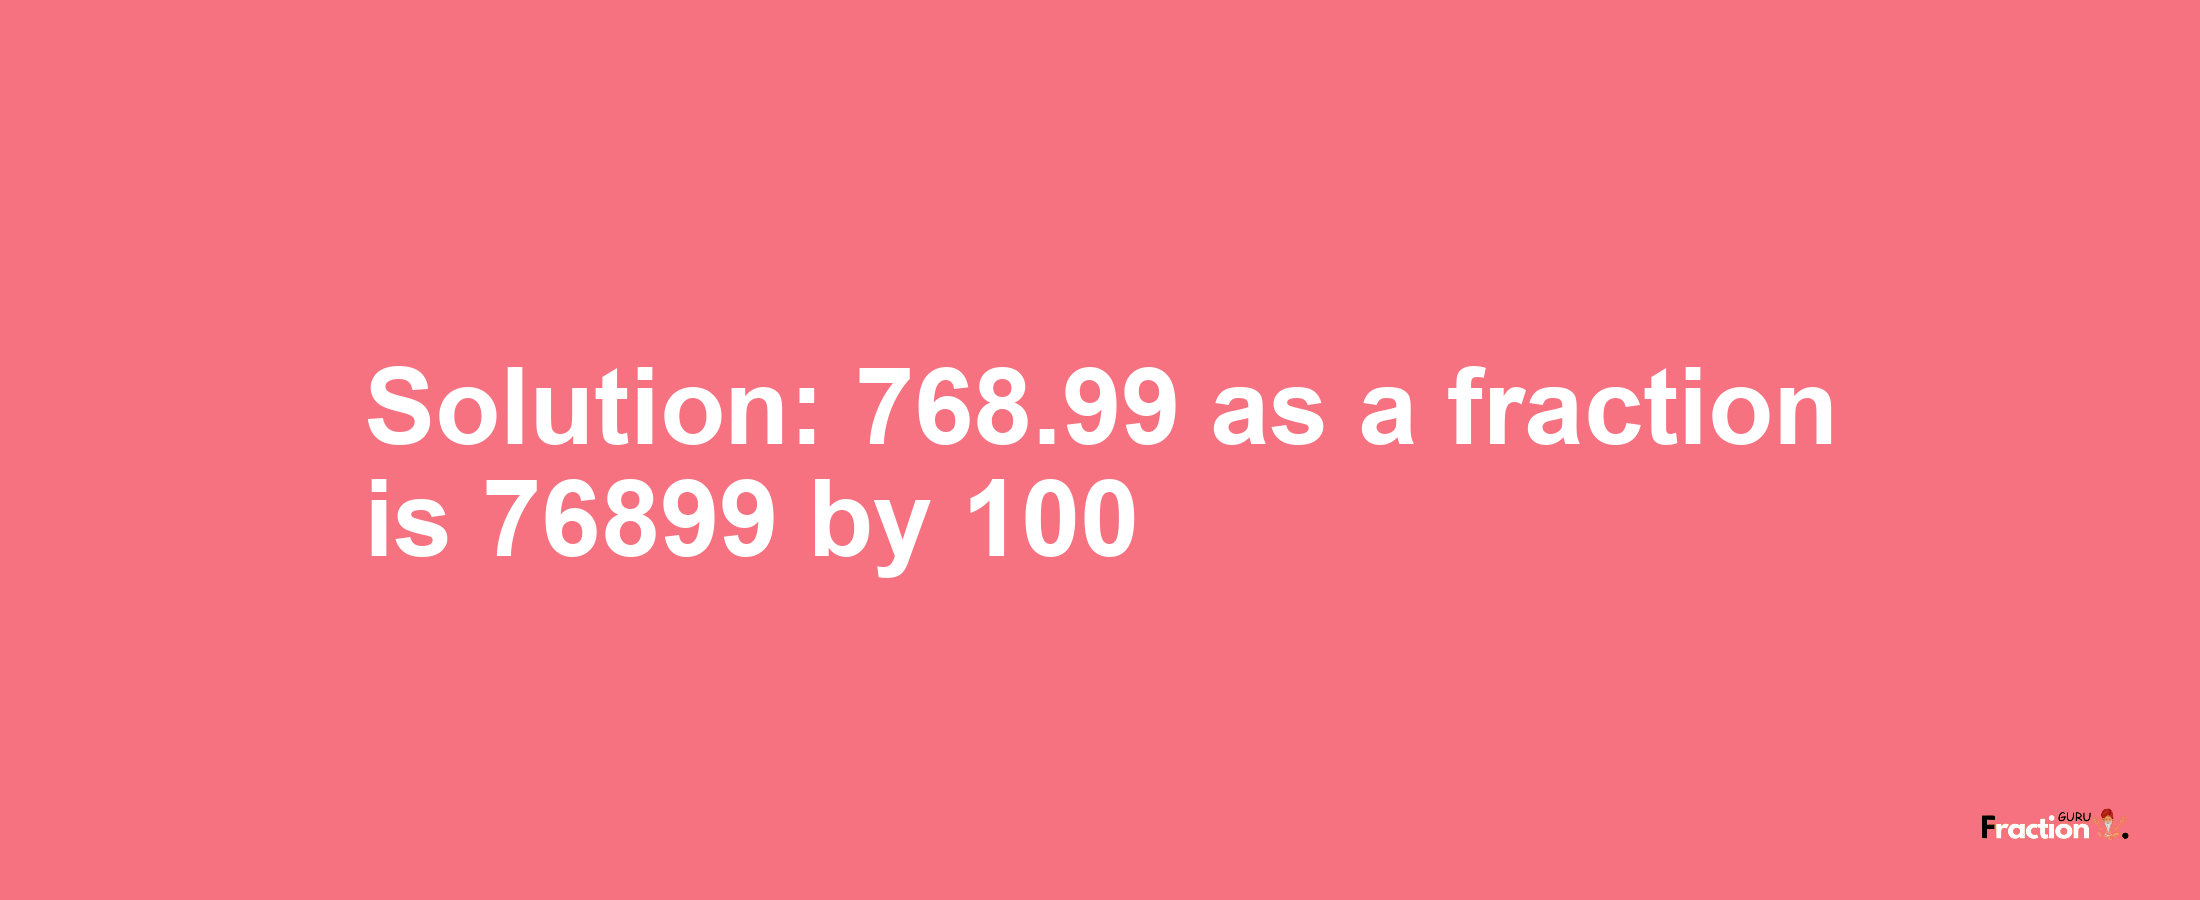 Solution:768.99 as a fraction is 76899/100